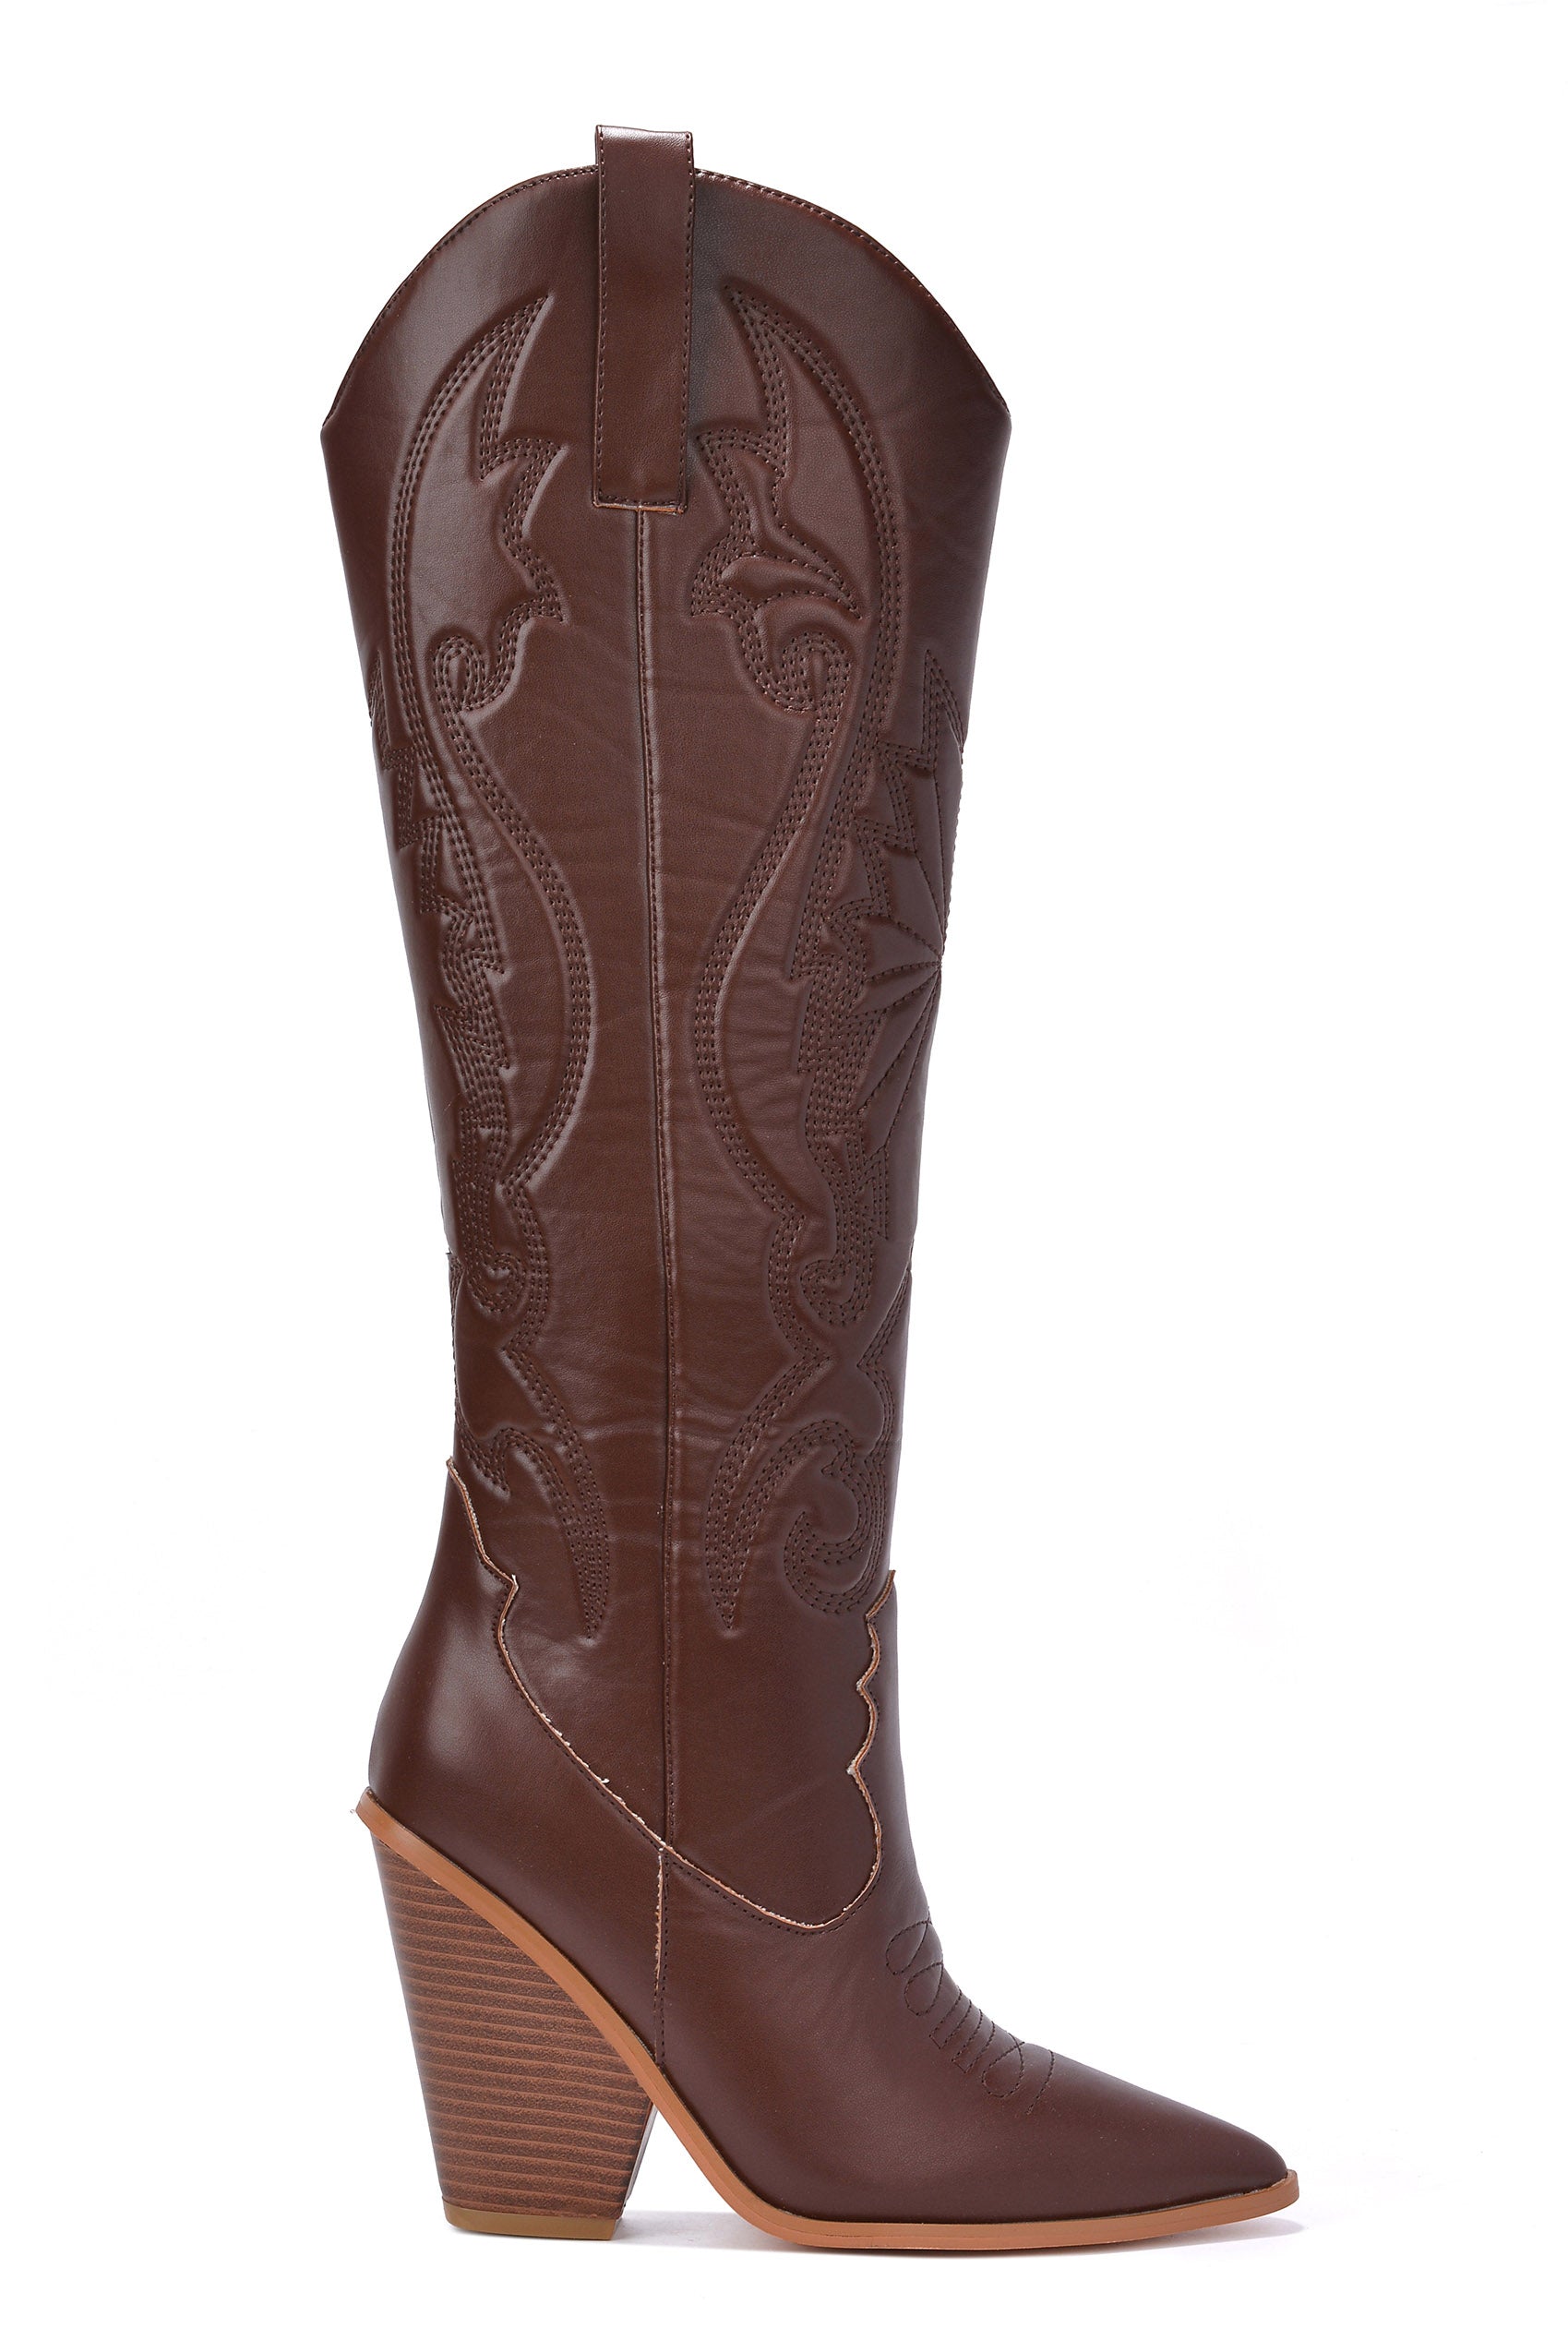 UrbanOG - Encanted Pointy Toe Knee High Cowboy Boots - BOOTS